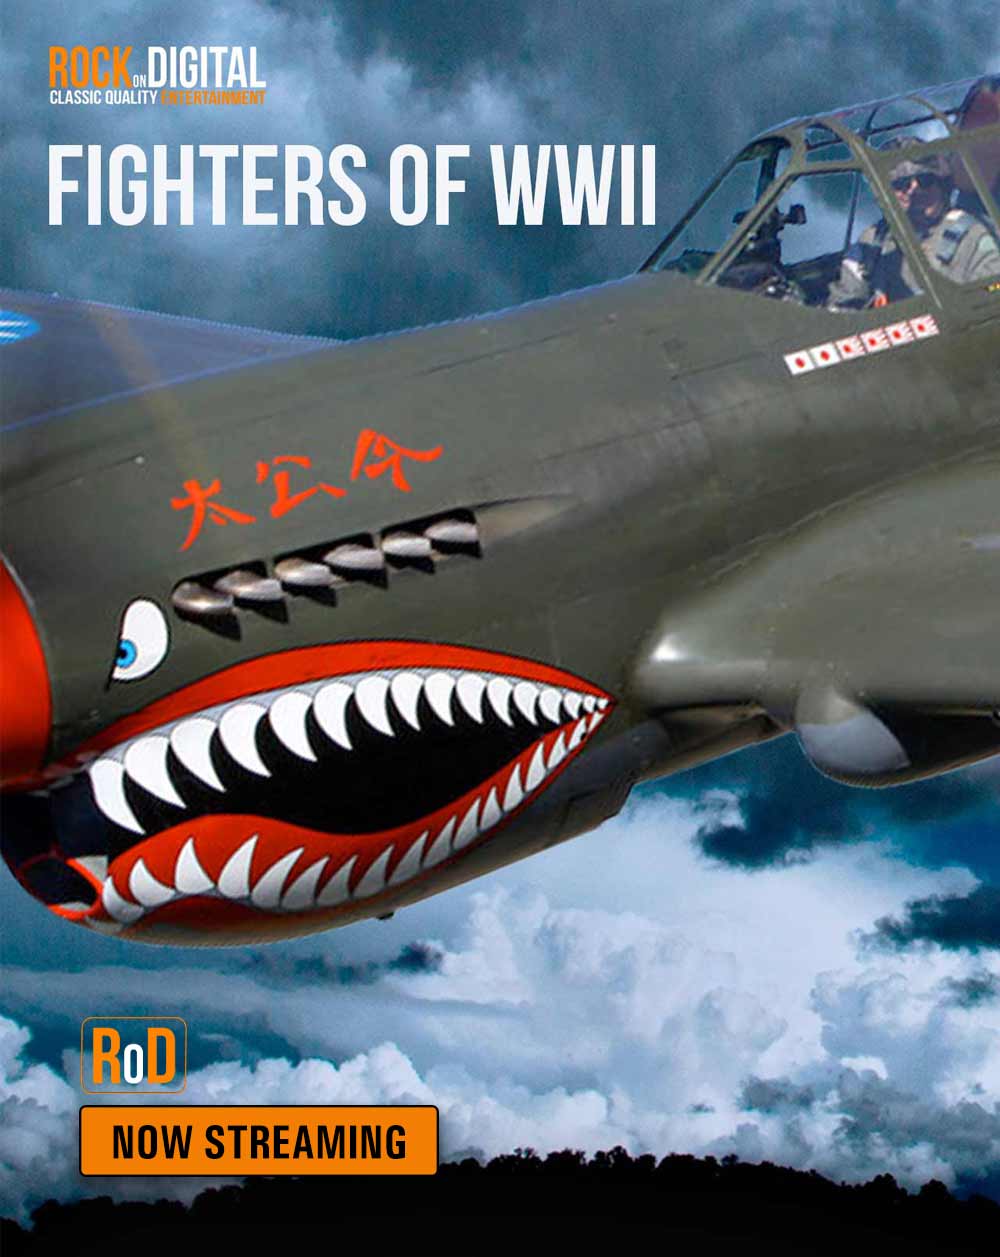 Fighters-of-WWII.jpg